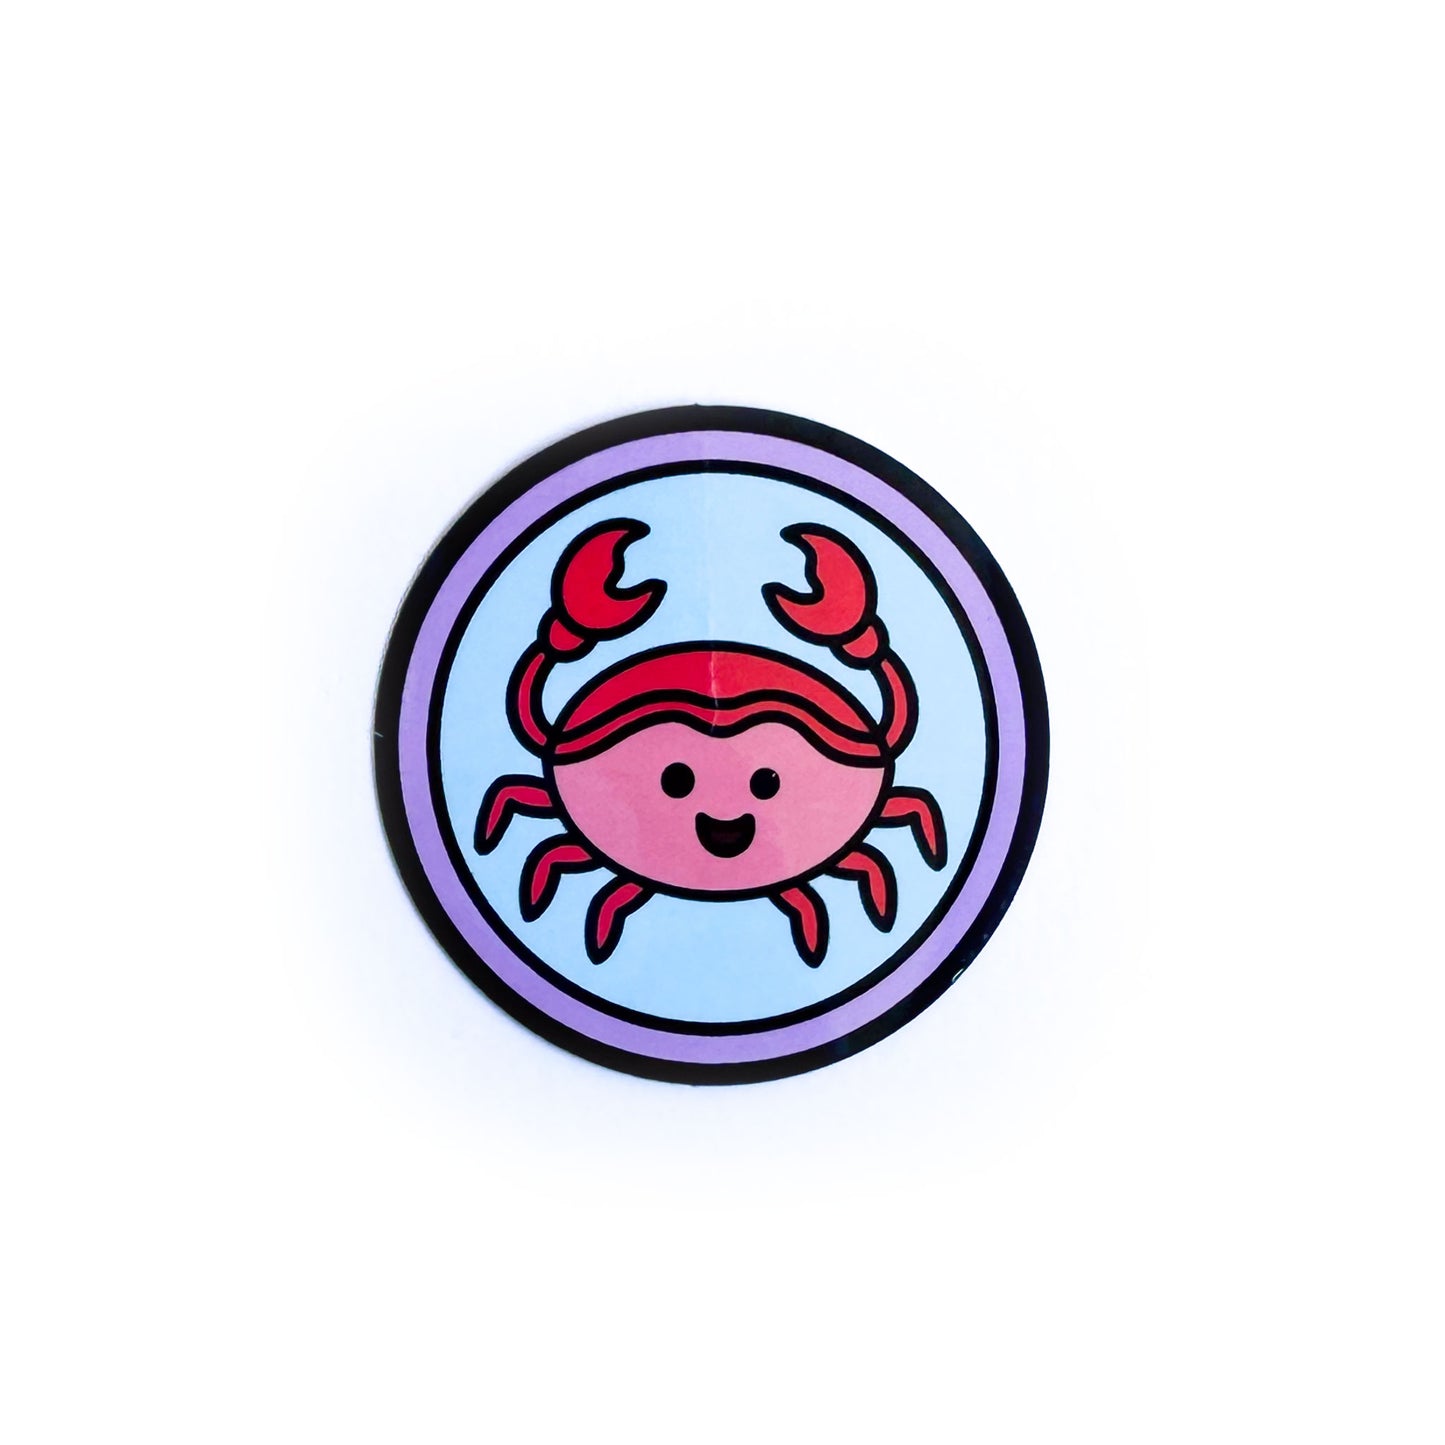 A circular sticker with a cute crab illustration to represent the Cancer zodiac sign in it with a blue background and purple border circle. 